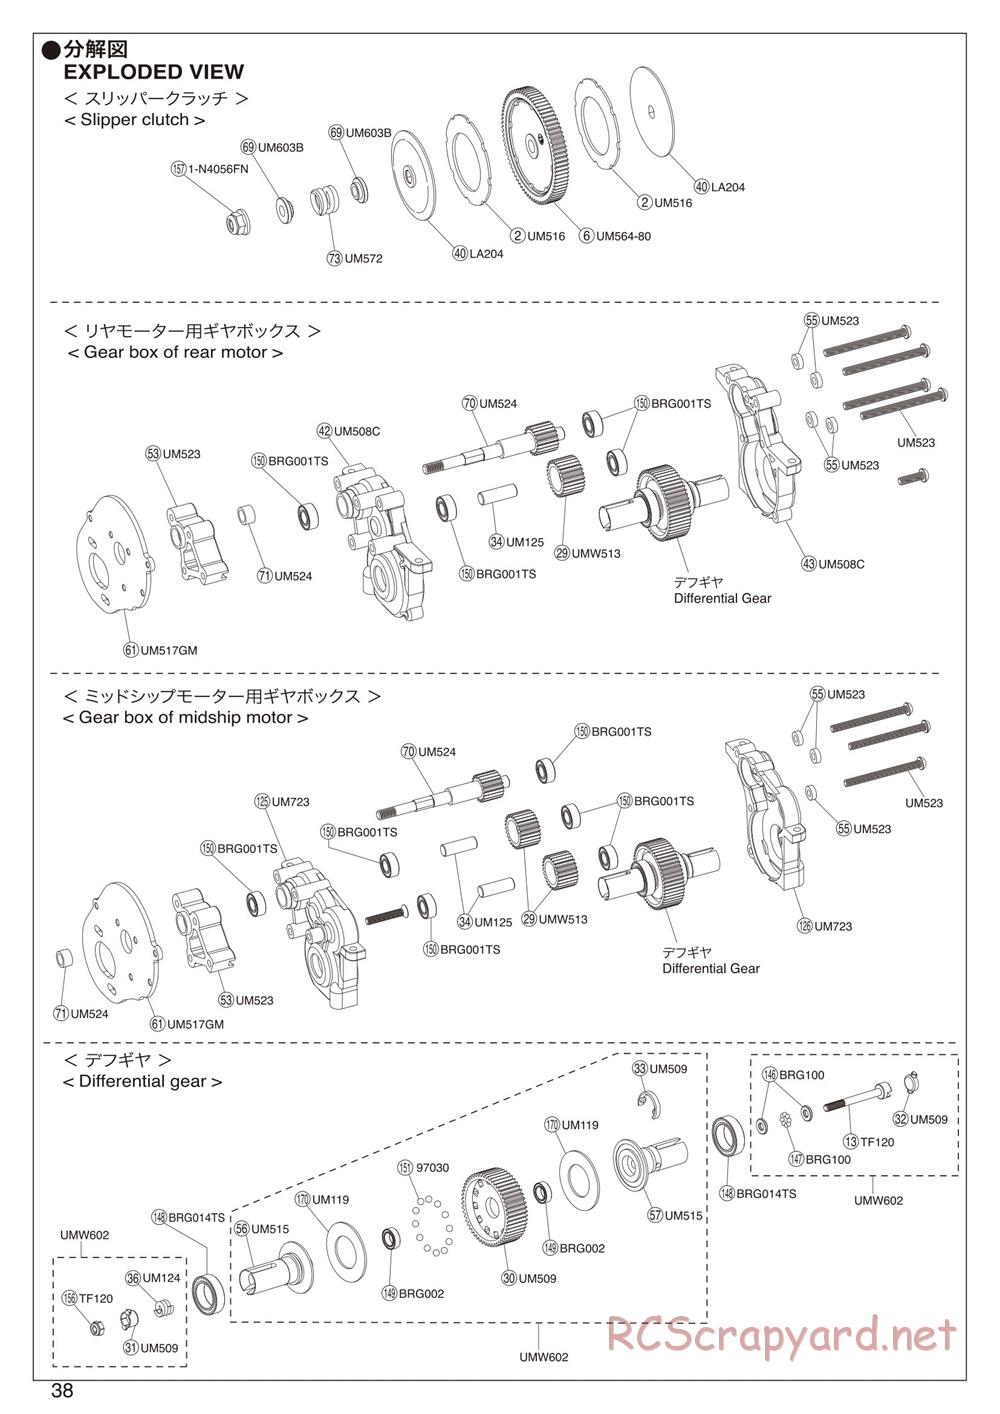 Kyosho - Ultima RT6 - Exploded Views - Page 2